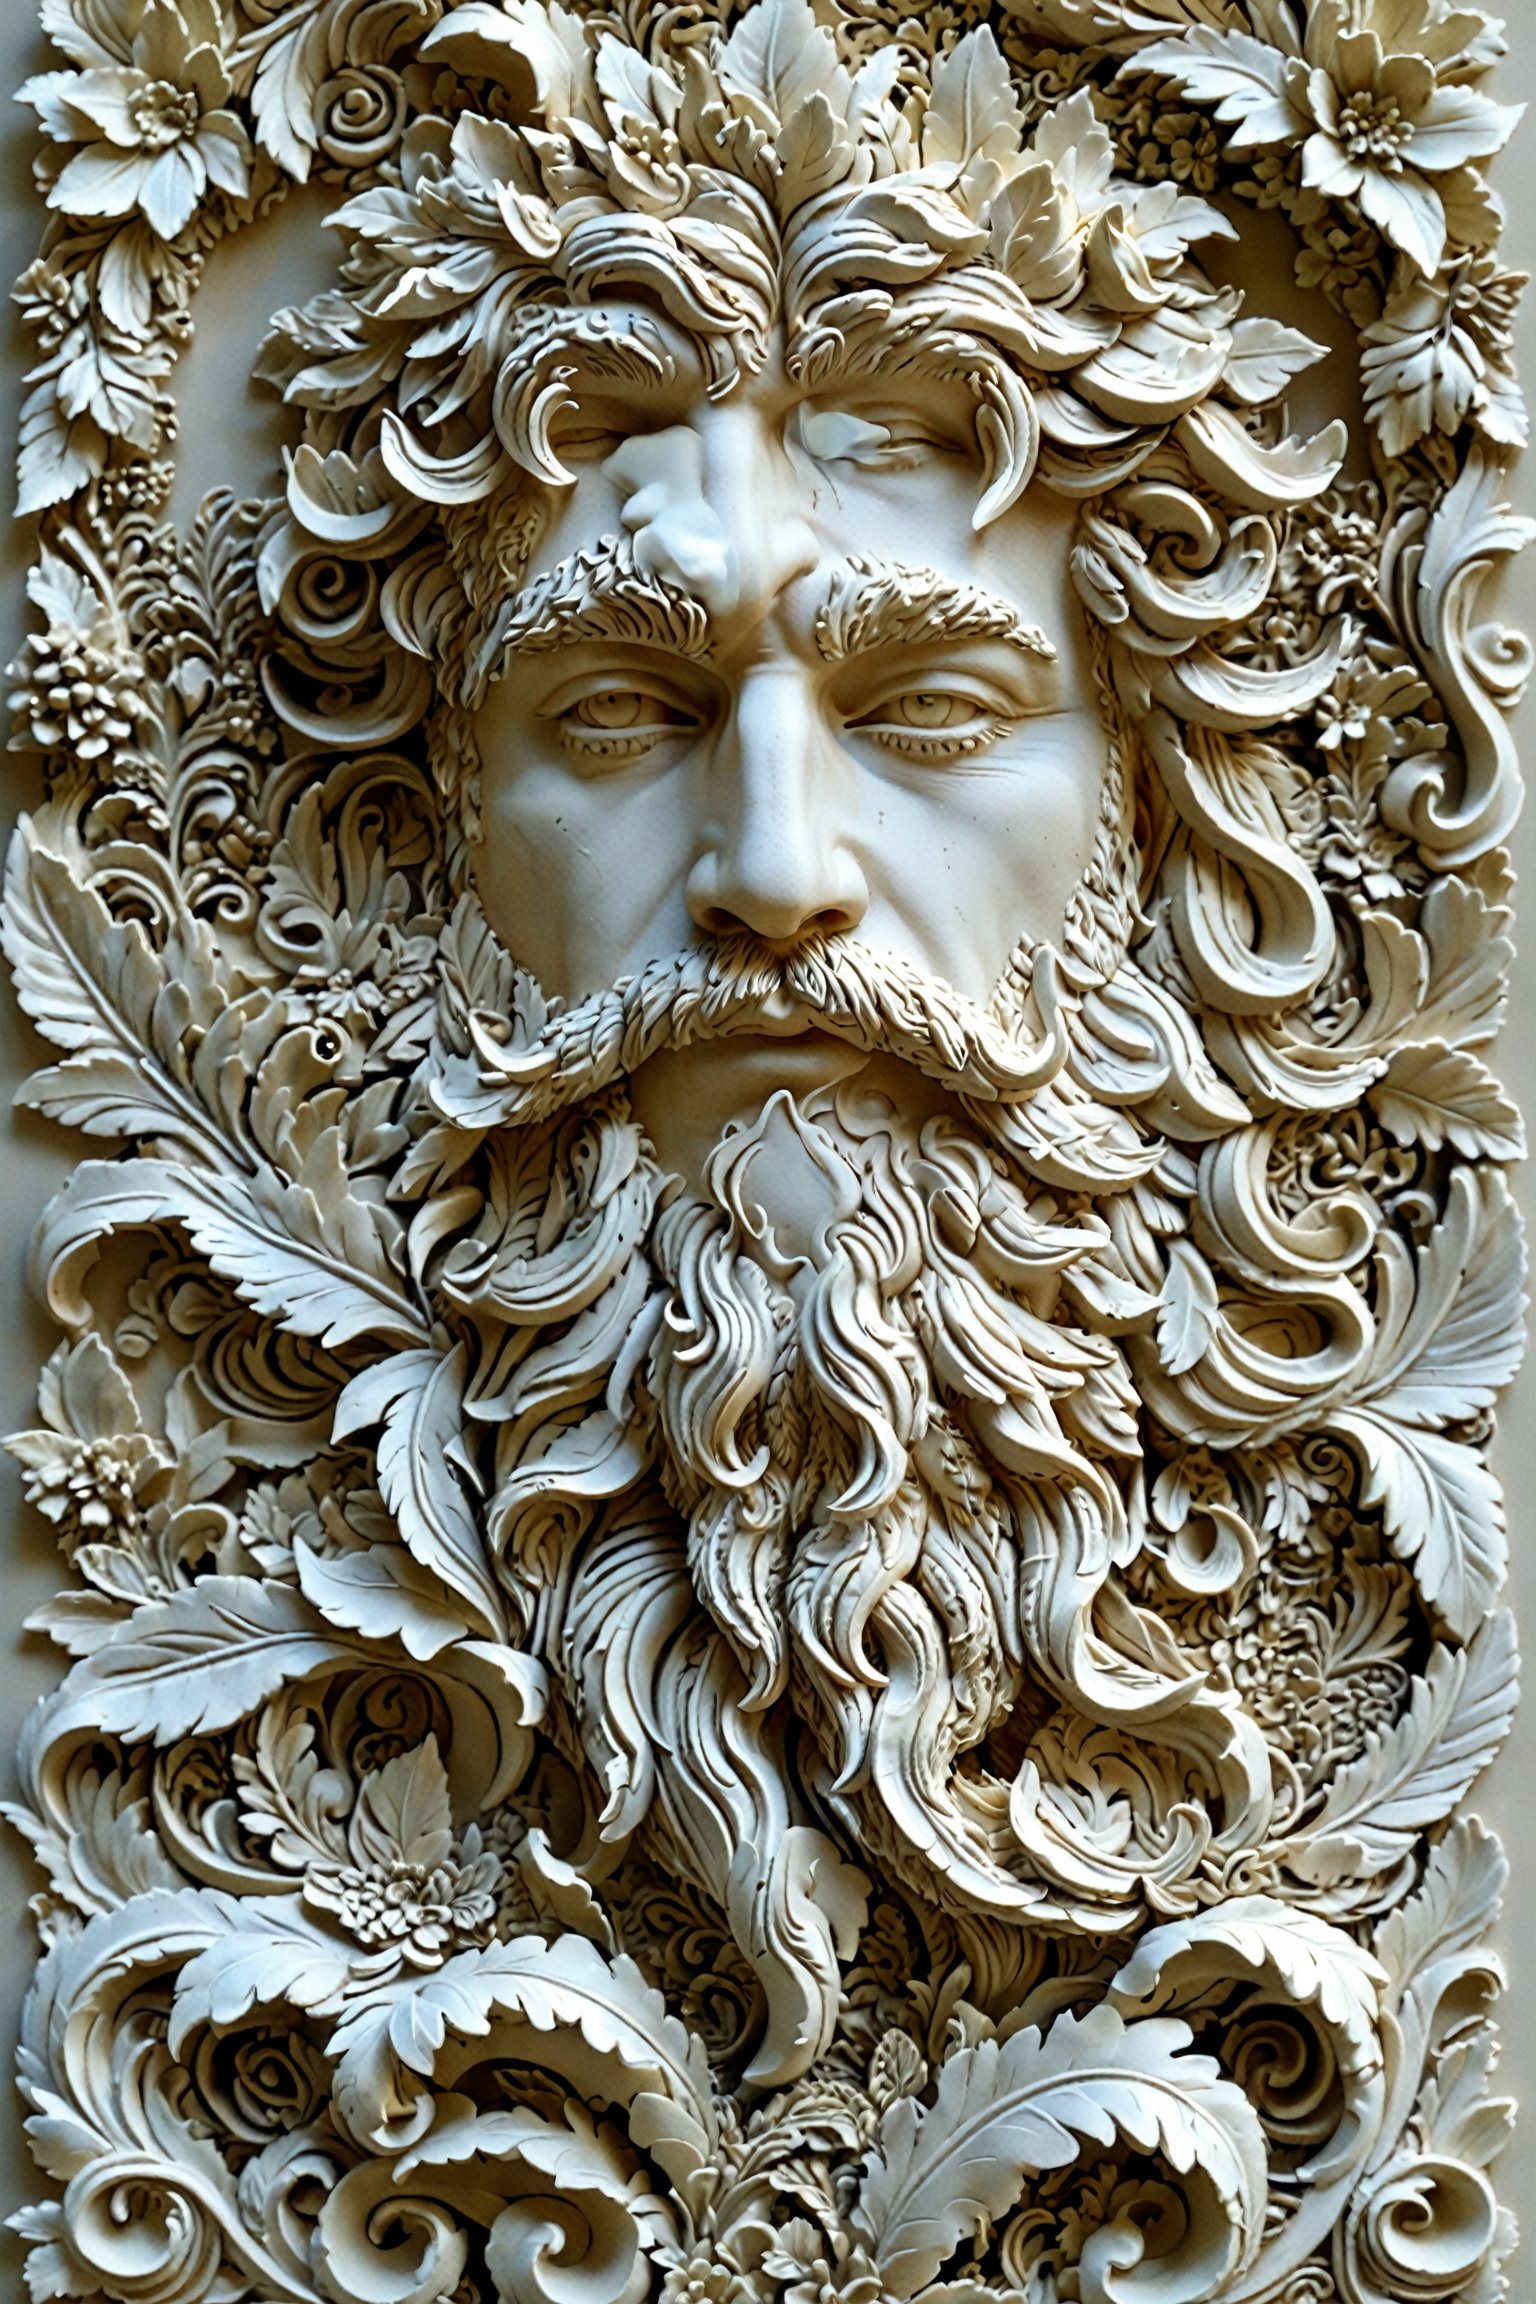 An intricate and detailed sculpture of a male face, surrounded by an array of ornate patterns and designs. The face is adorned with flowing hair, meticulously crafted with leaves and feathers. The beard and facial hair are also intricately designed, blending seamlessly with the surrounding elements. The background is filled with a myriad of floral patterns, butterflies, and other nature-inspired motifs. The entire composition exudes a sense of serenity and connection with nature.